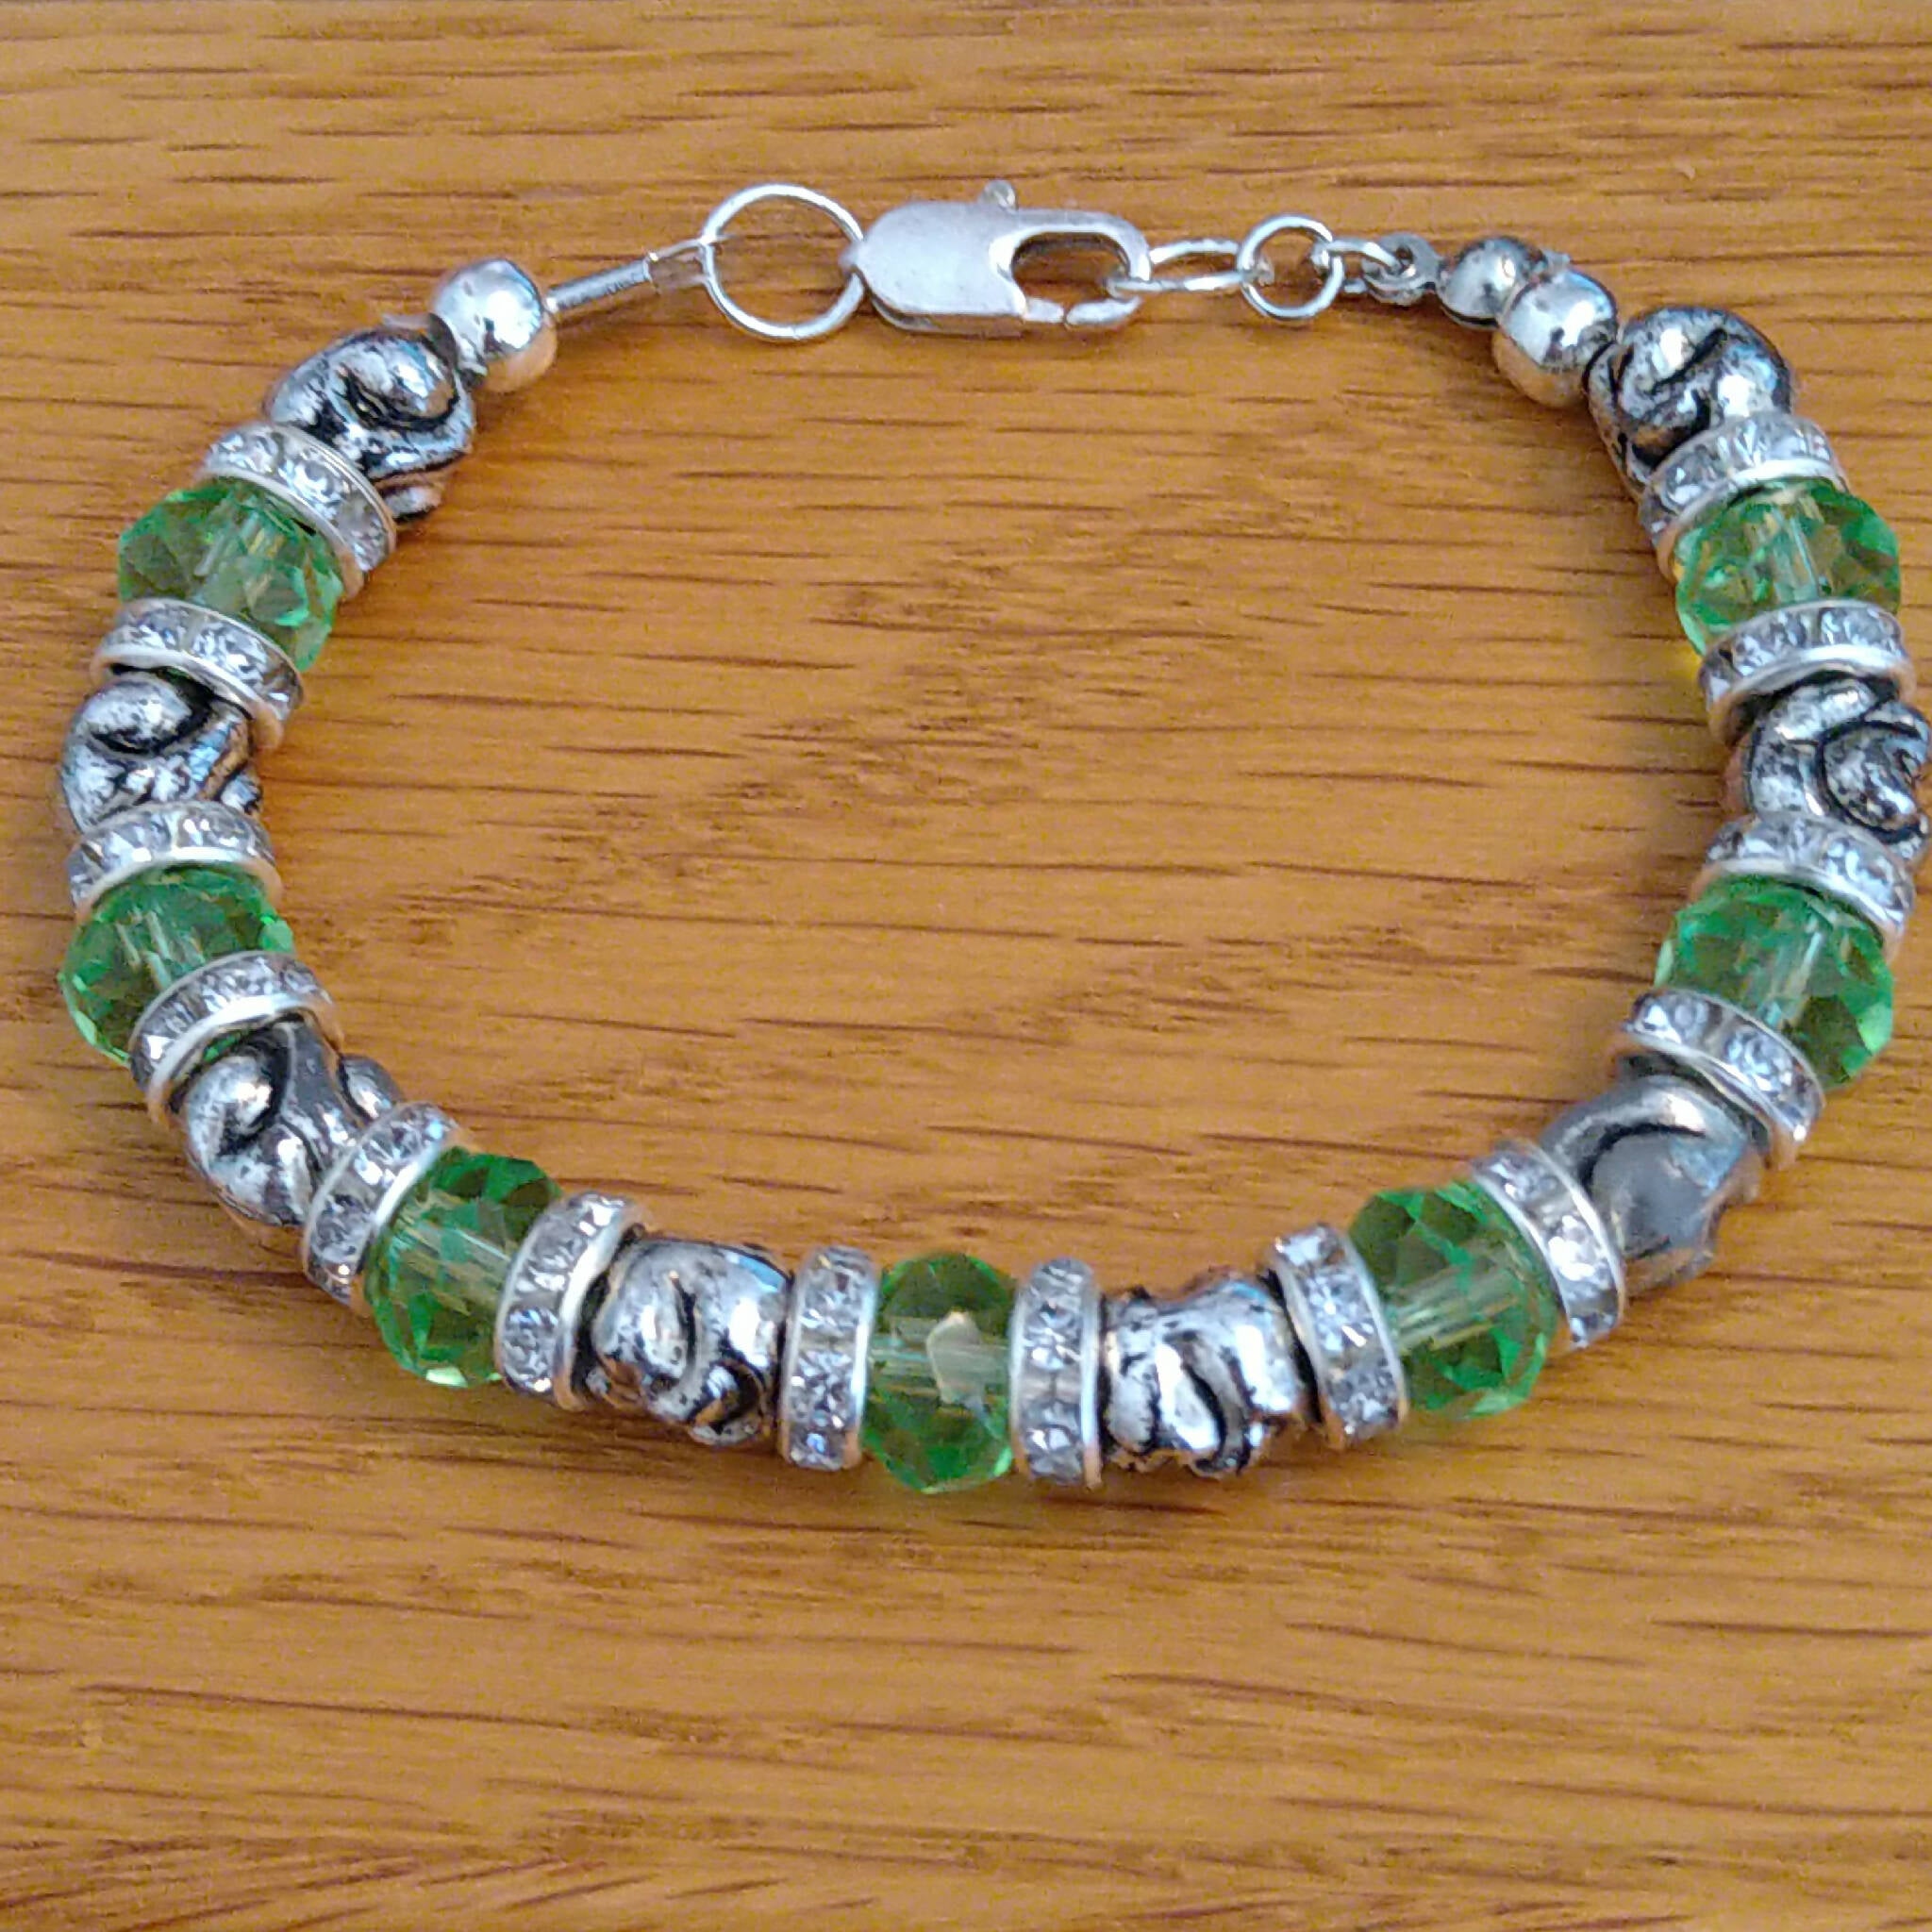 Handmade bracelet with recycled green & silver coloured beads & rhinestone rondelle spacers. Upcycled